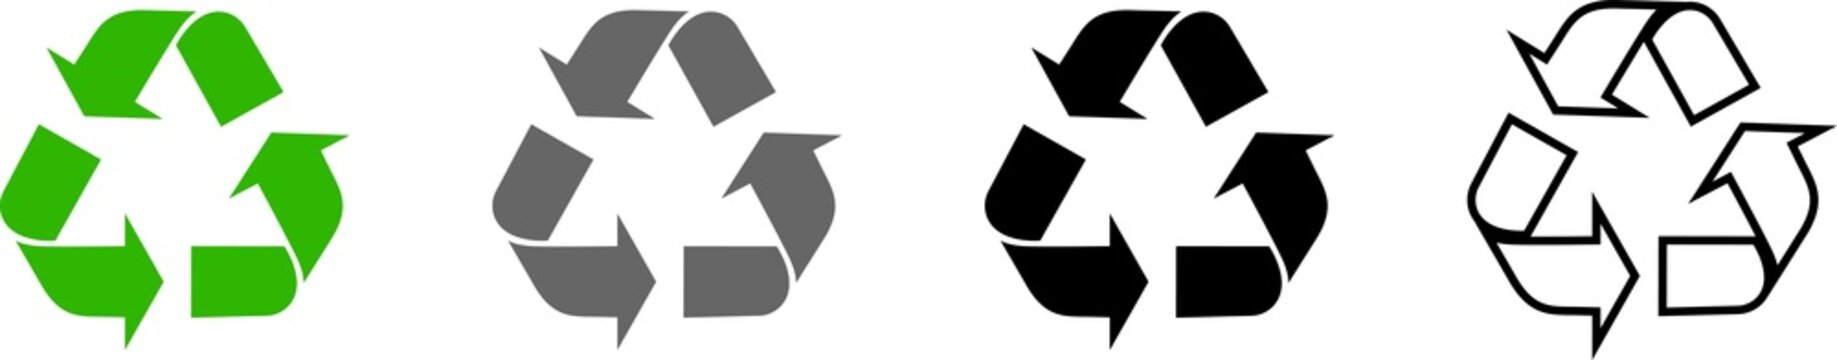 Recycling icons set, recycling arrows. Symbol of ecology, naturalness, purity on transparent background. PNG image